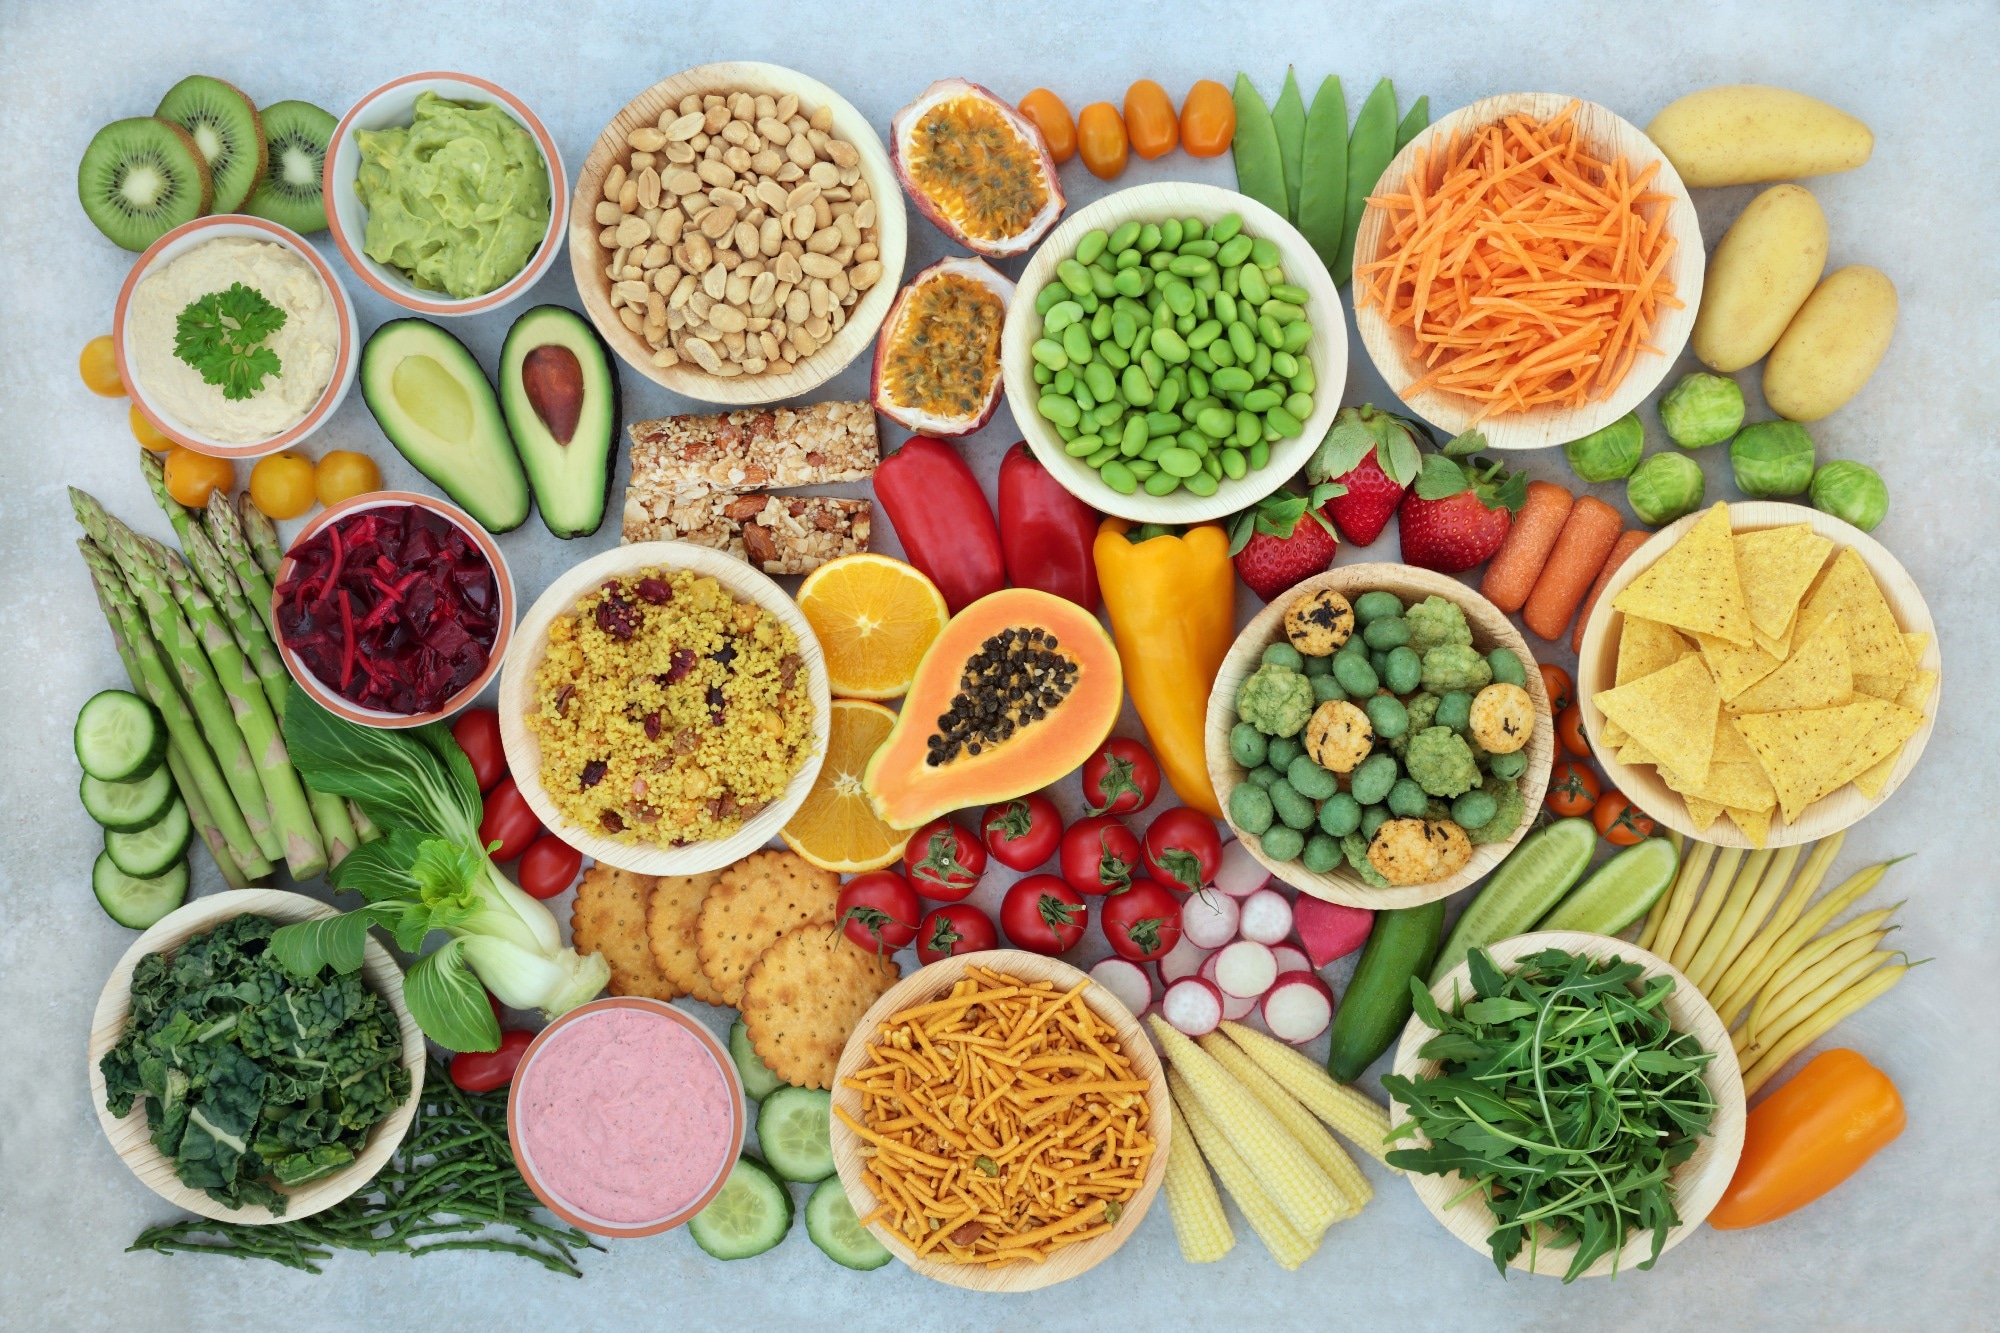 Study: Plant-based dietary patterns and genetic susceptibility to obesity in the CARTaGENE cohort. Image Credit: marilyn barbone/Shutterstock.com